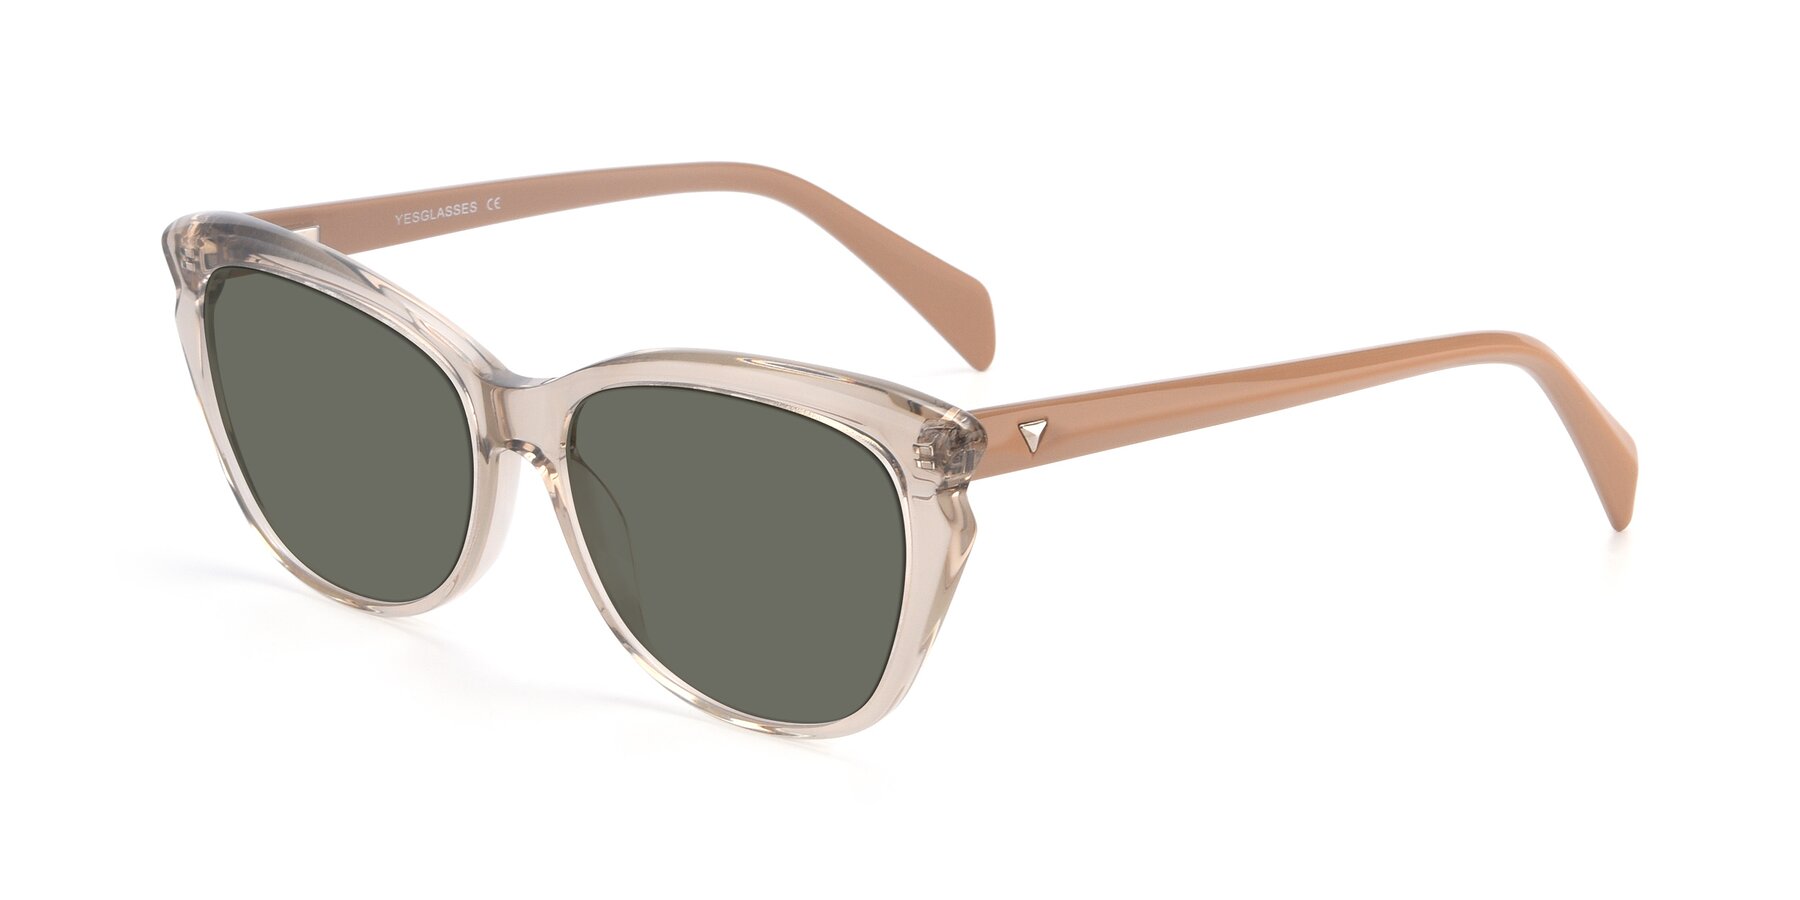 Angle of 17629 in Transparent Brown with Gray Polarized Lenses